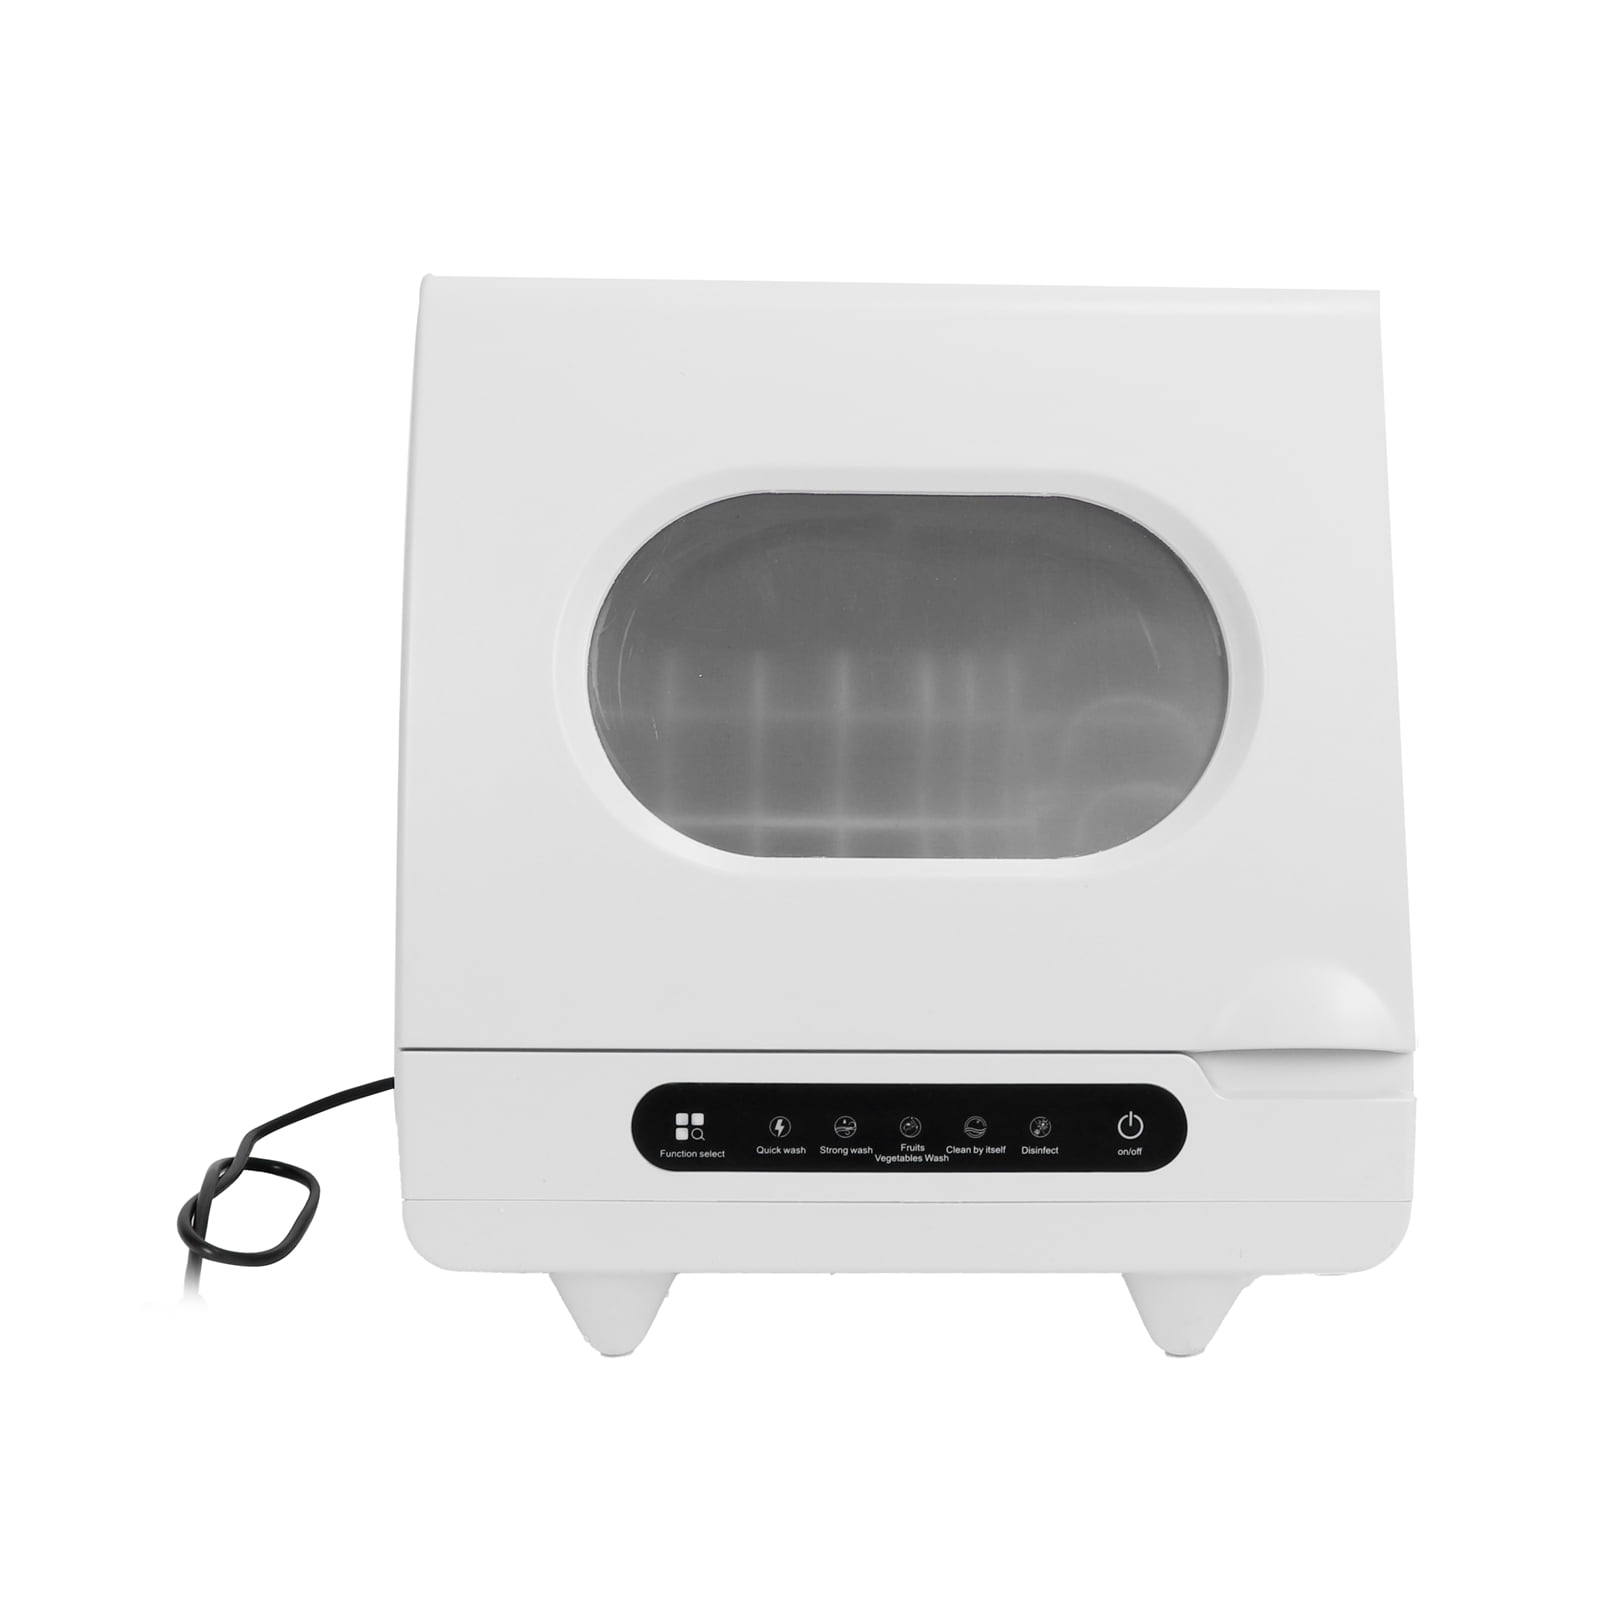 iWaveCube Personal Size Microwave